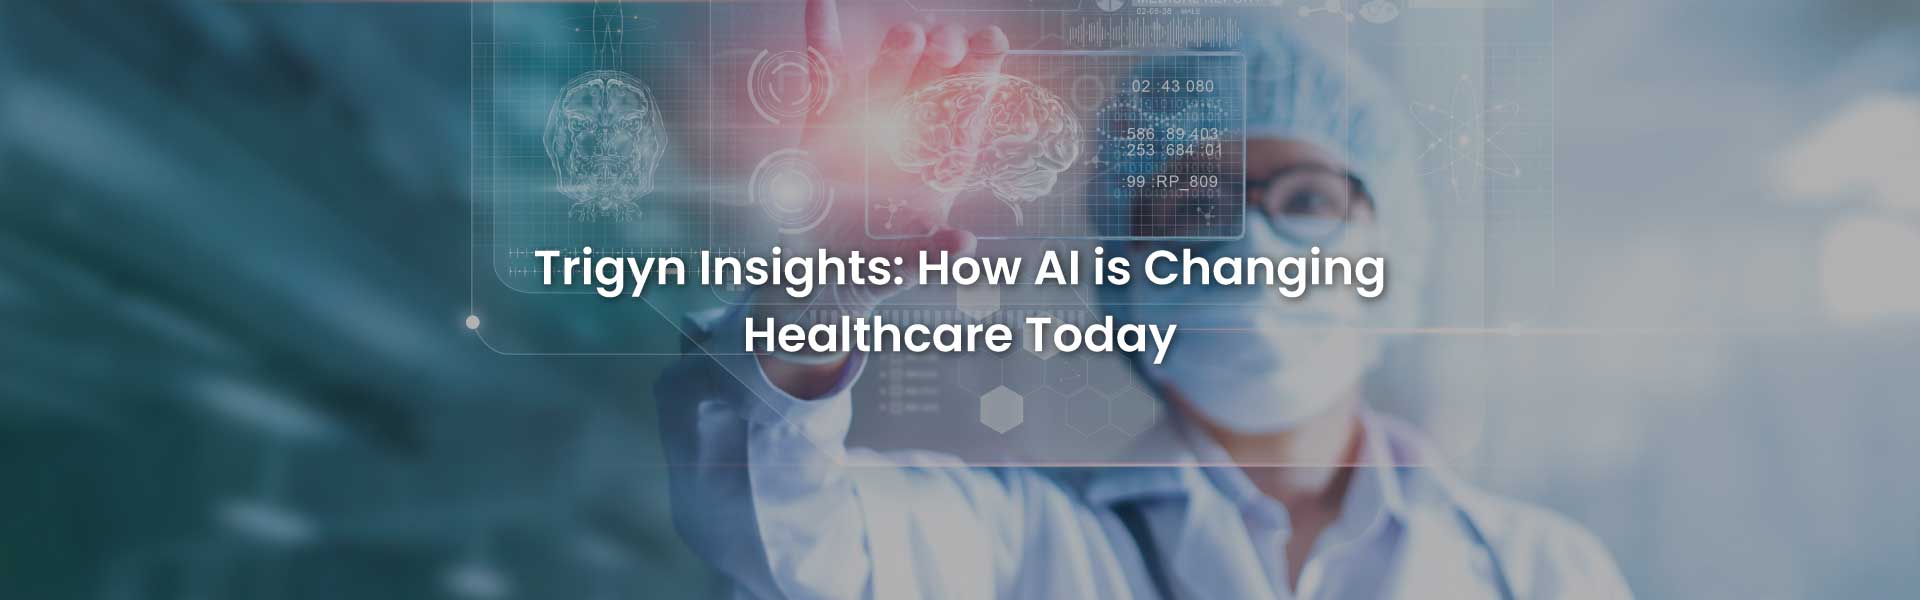 AI is Changing Healthcare Today